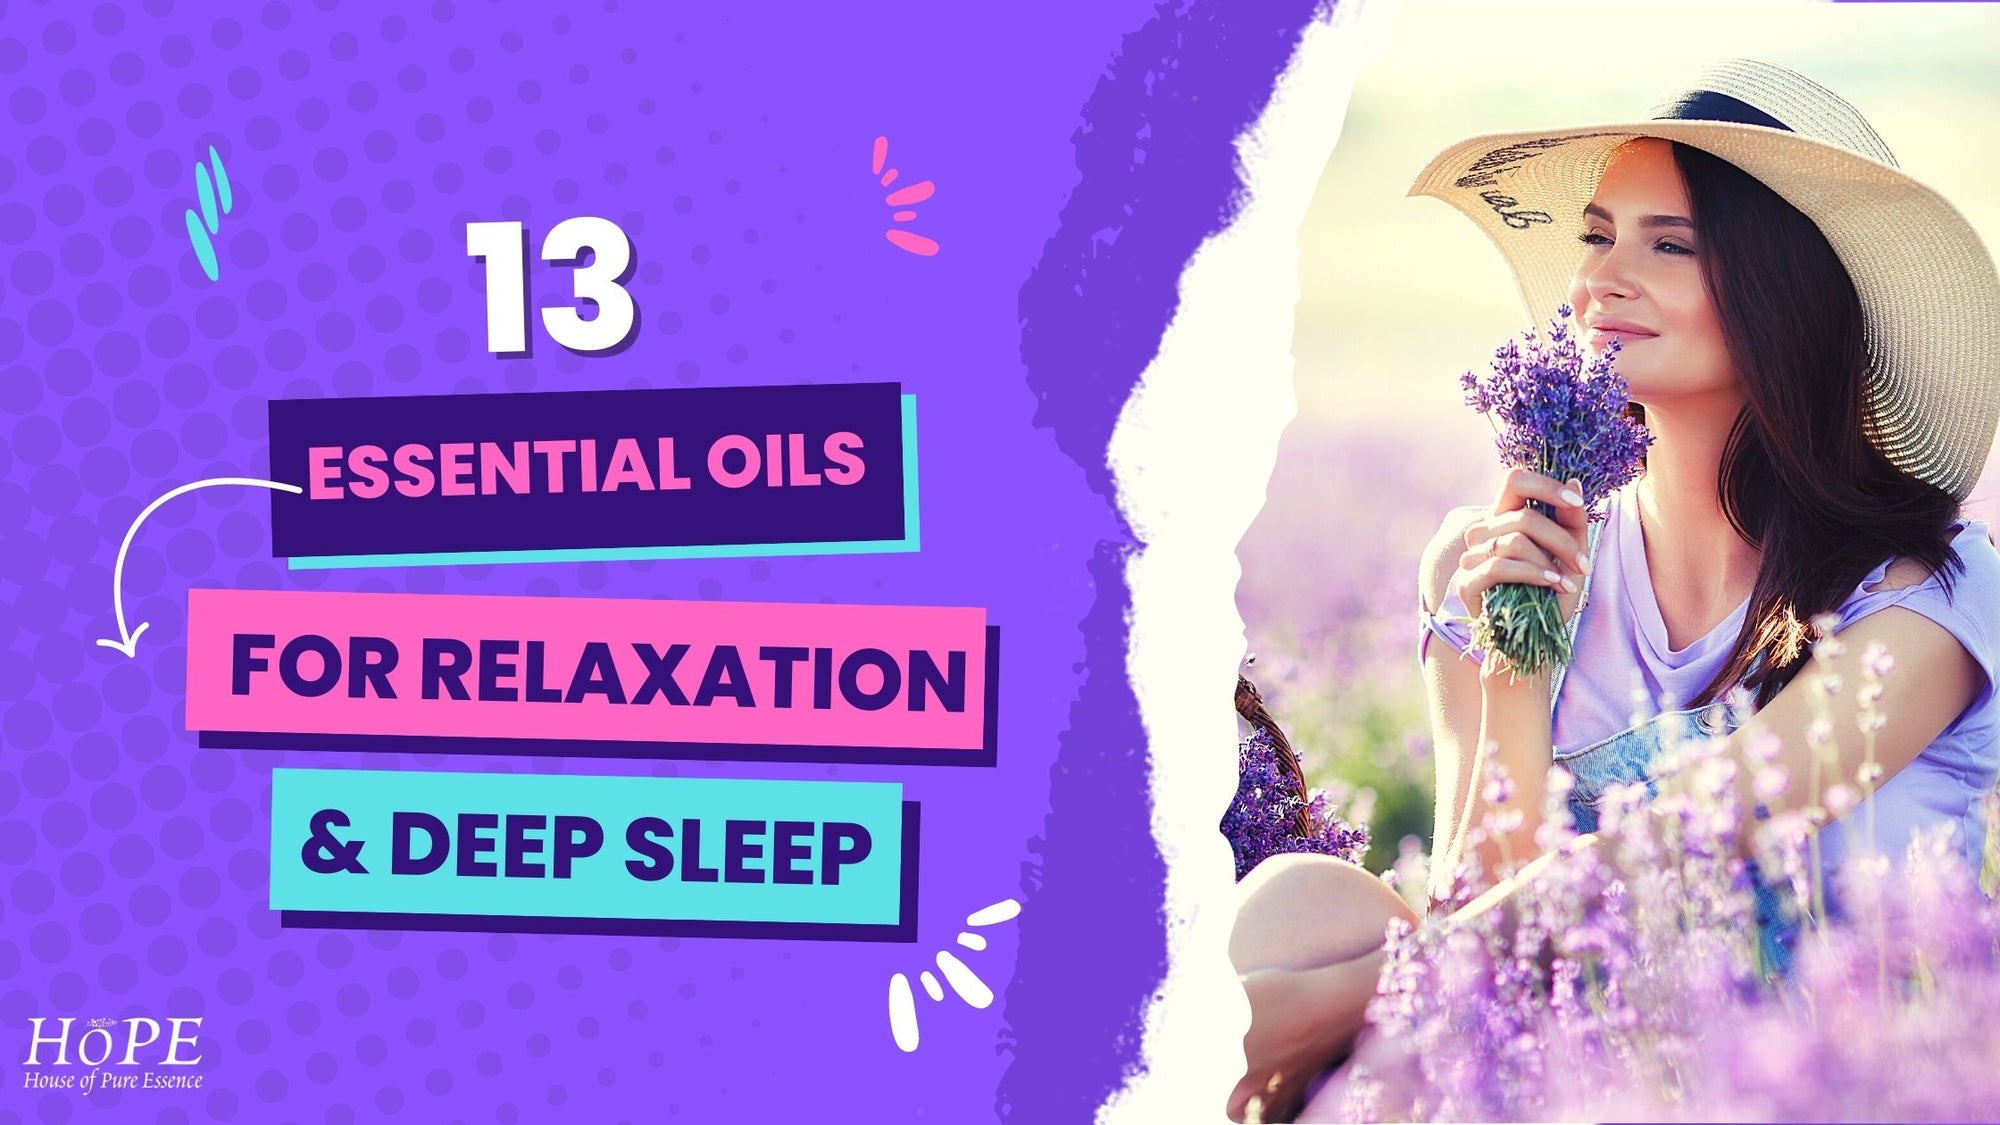 What Are The Essential Oils for Relaxation and Deep Sleep?